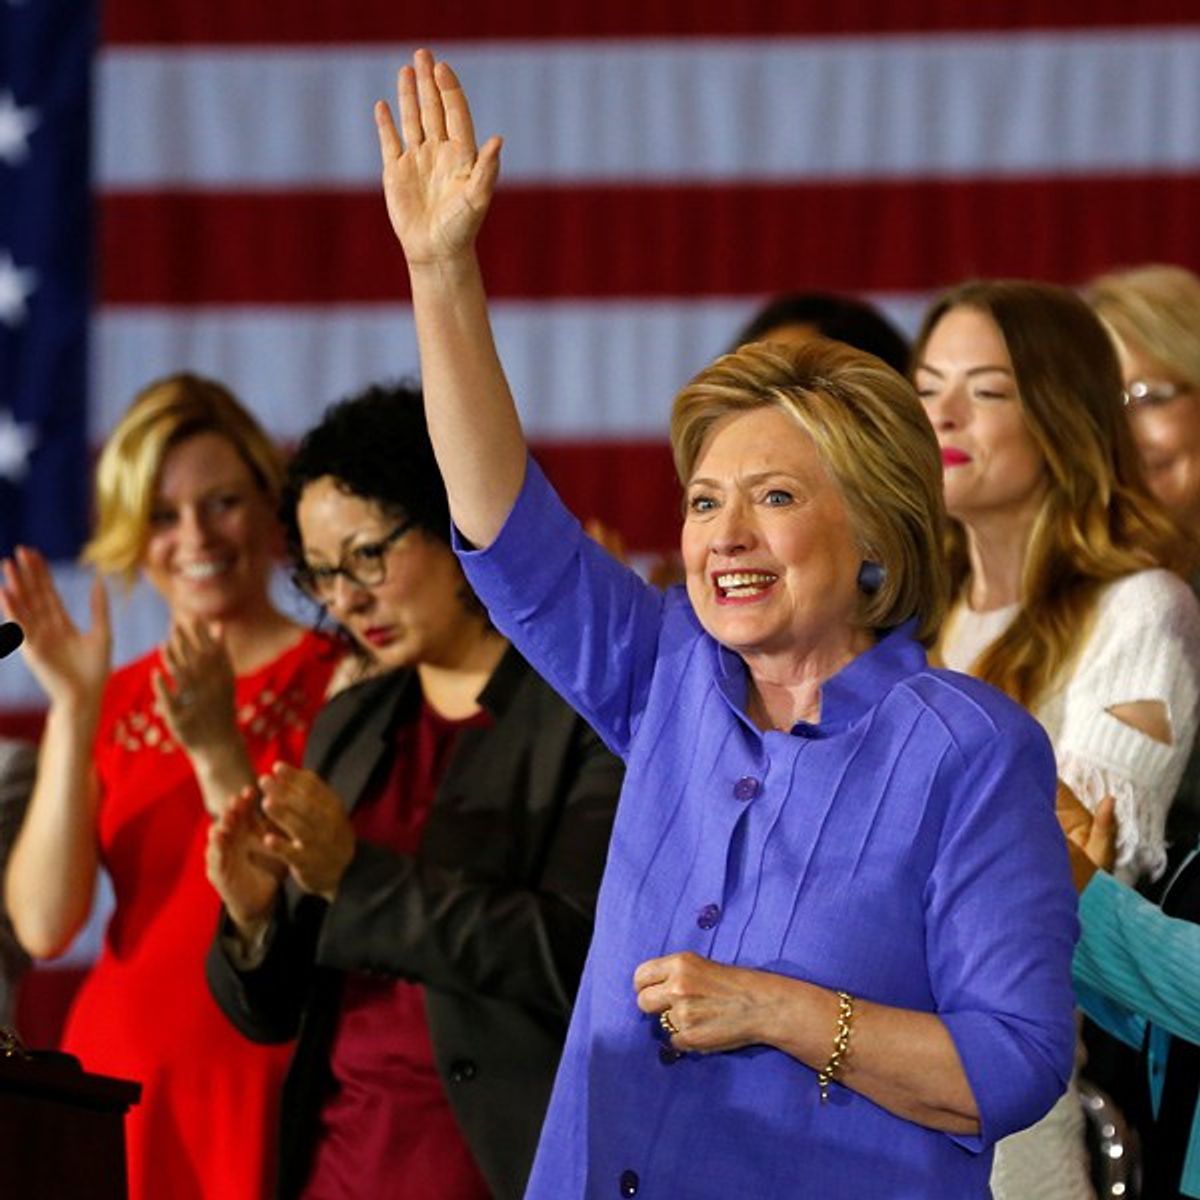 Being A Woman In The United States With The First Female Presidential Nominee